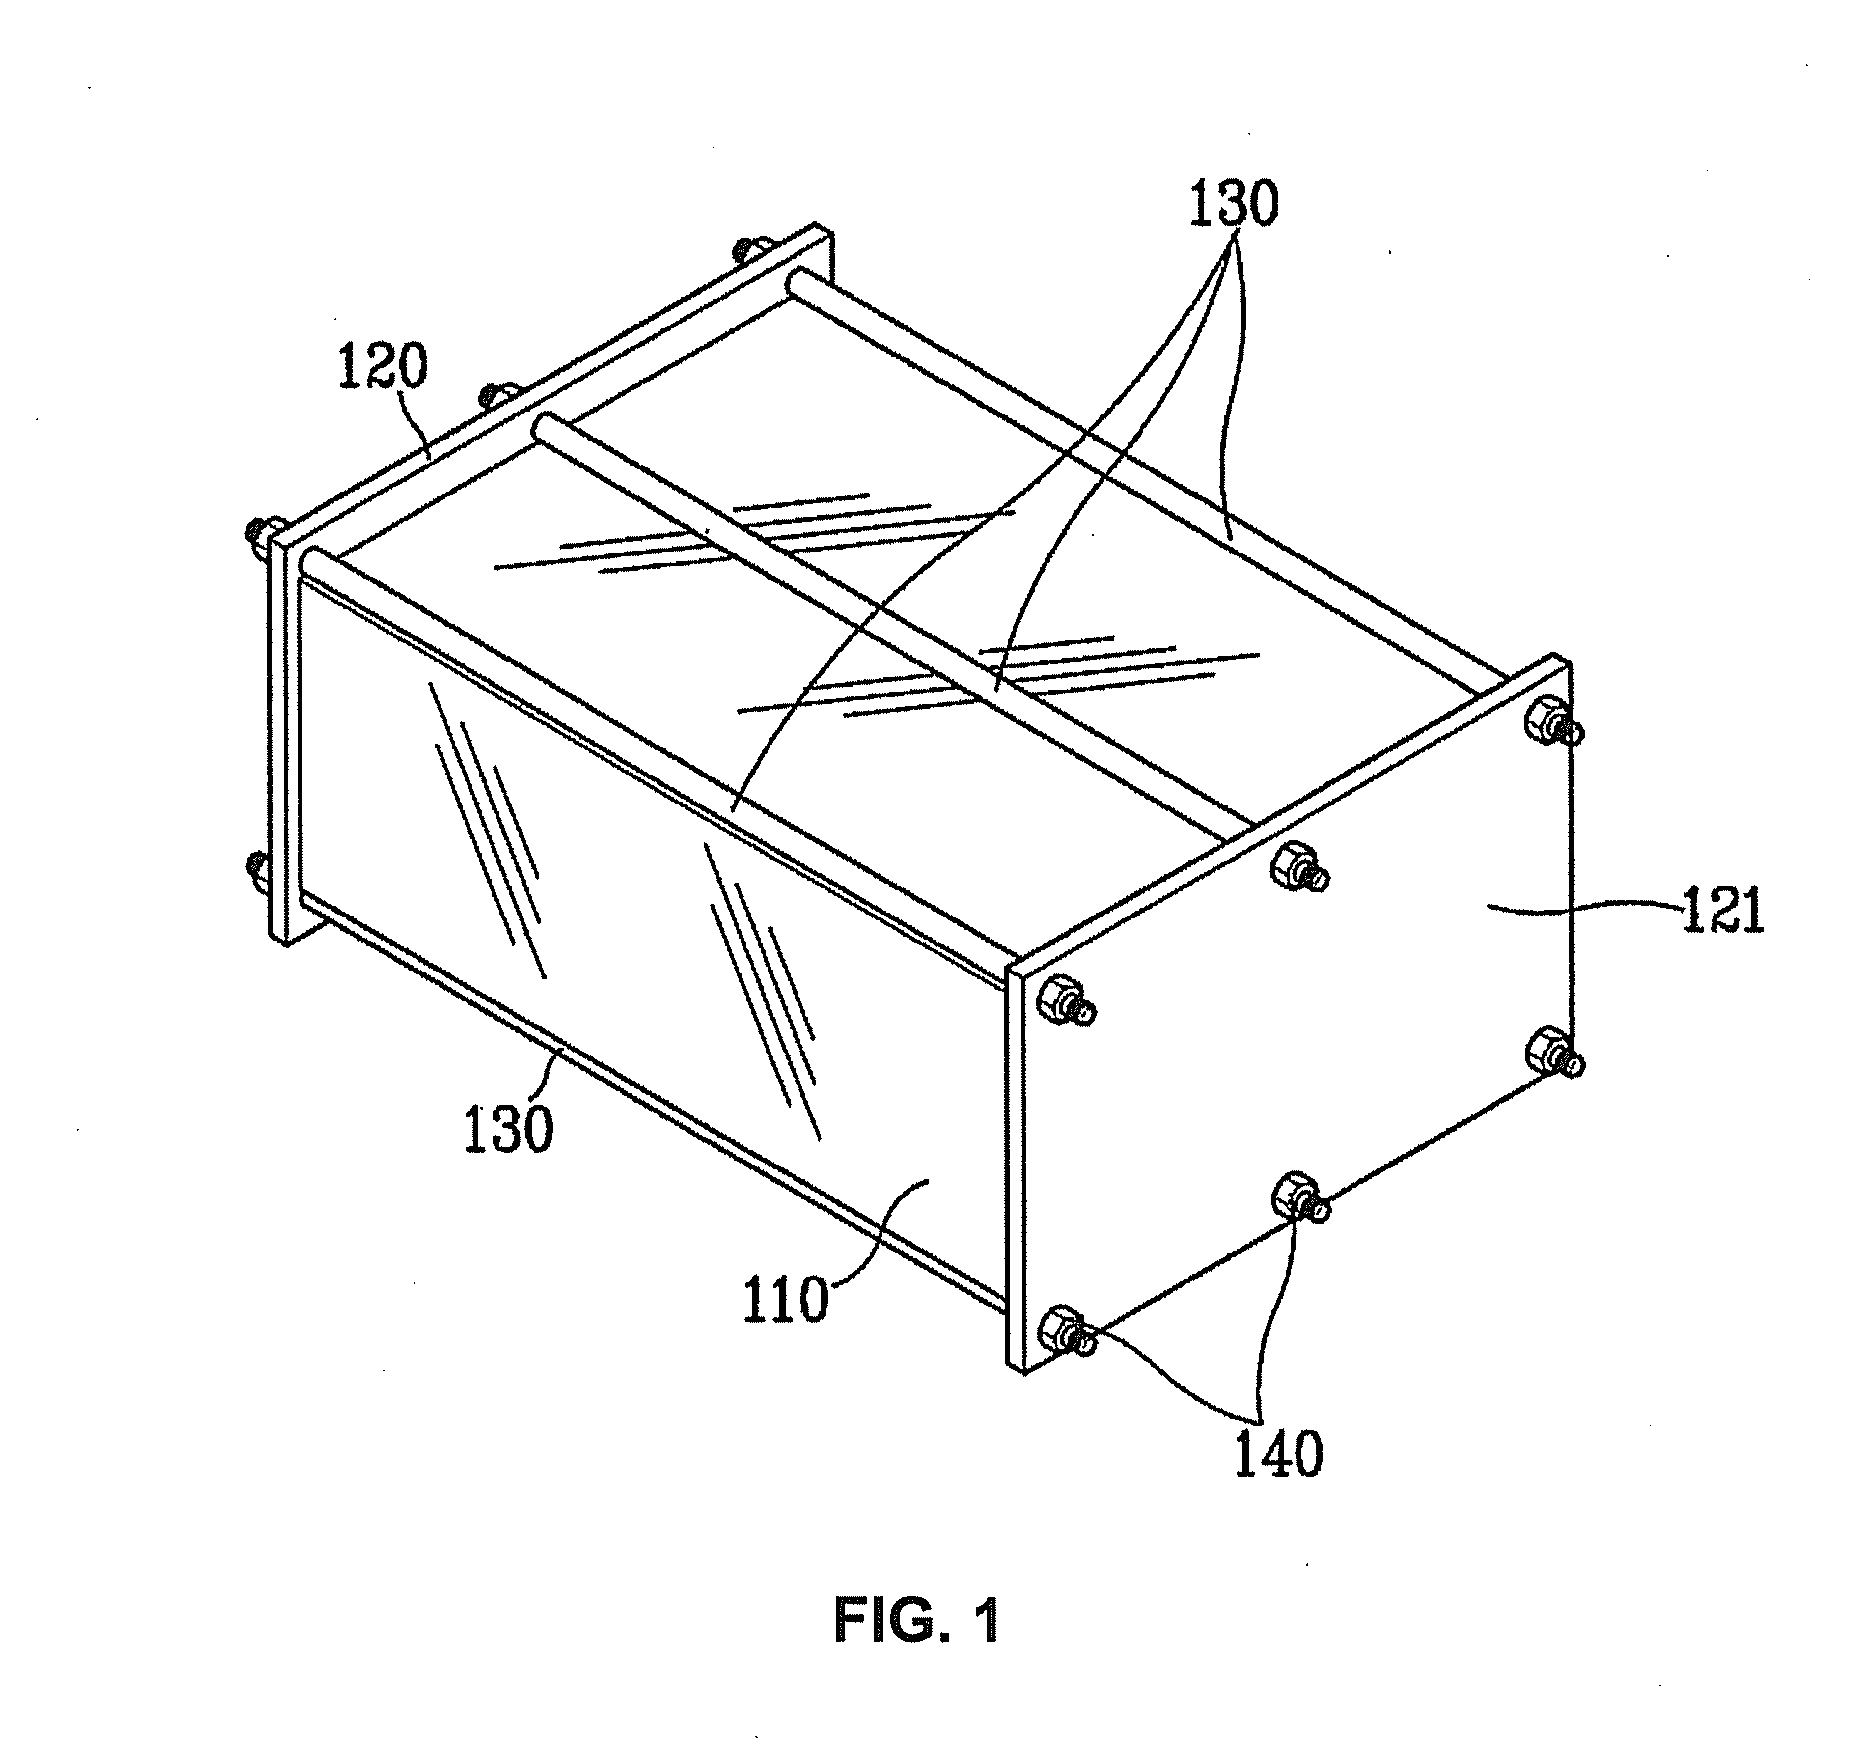 Method of clamping fuel cell stack